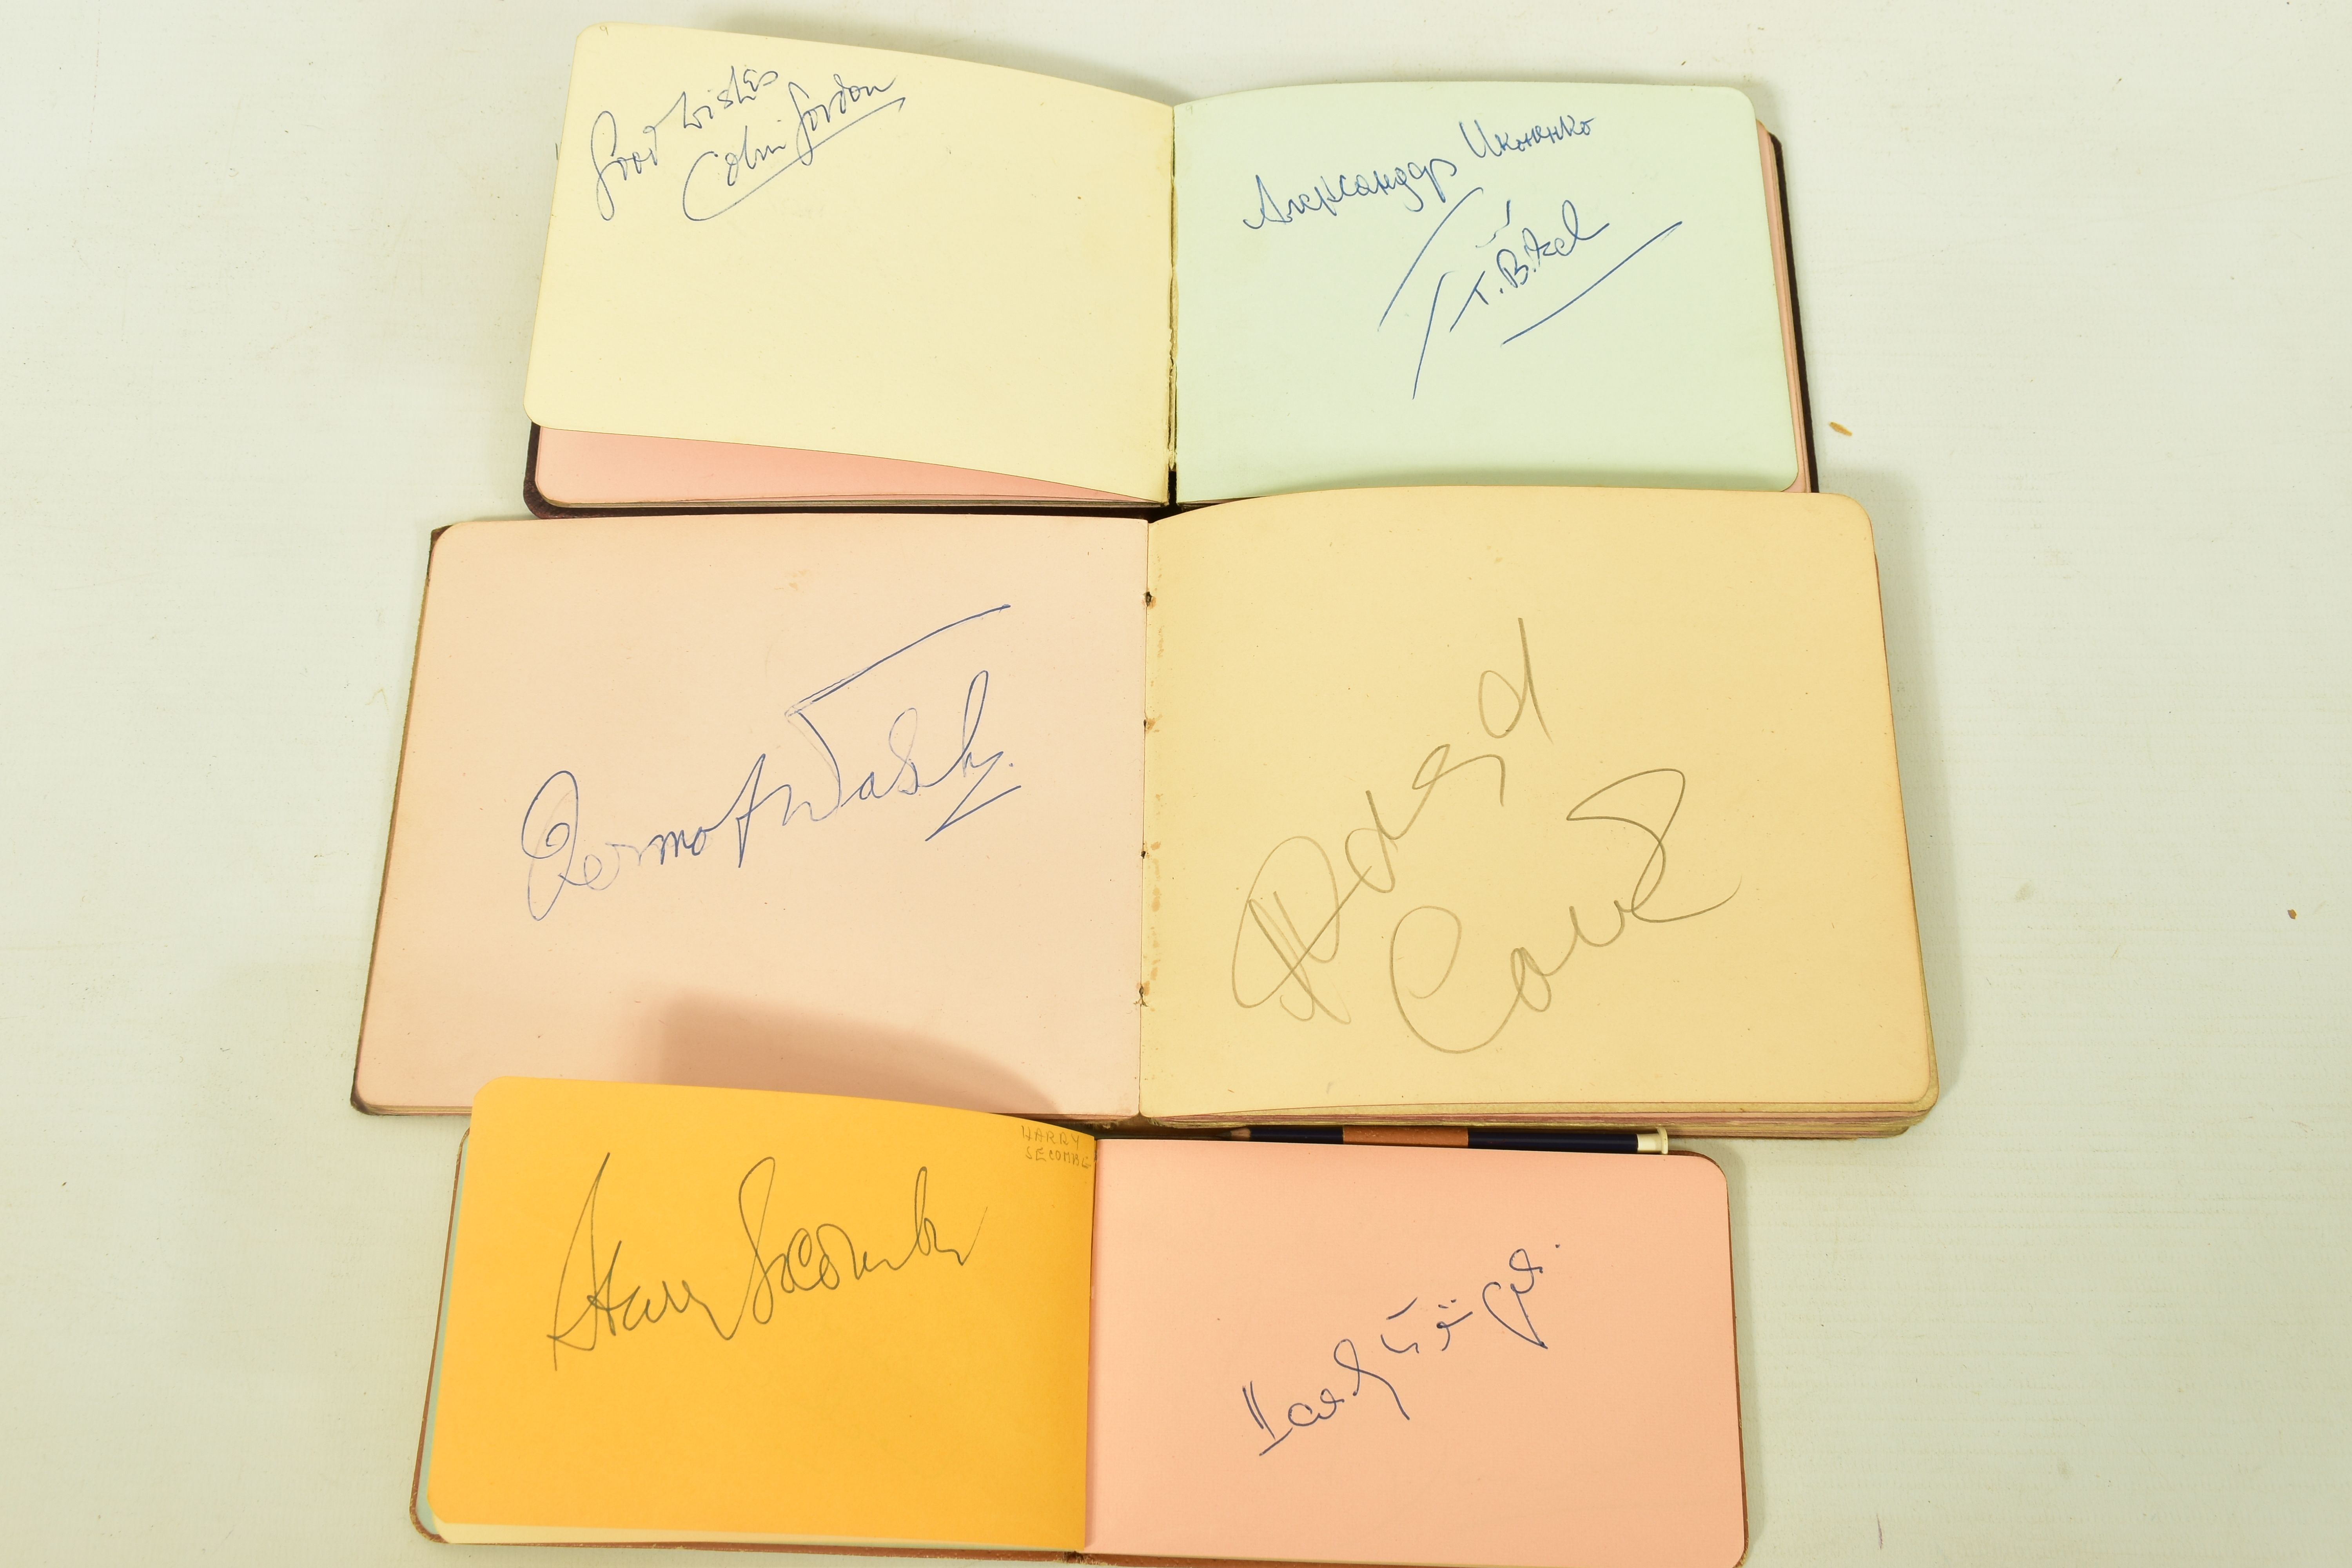 FILM & STAGE AUTOGRAPH ALBUM, a collection of signatures in three autograph albums featuring some of - Image 10 of 10